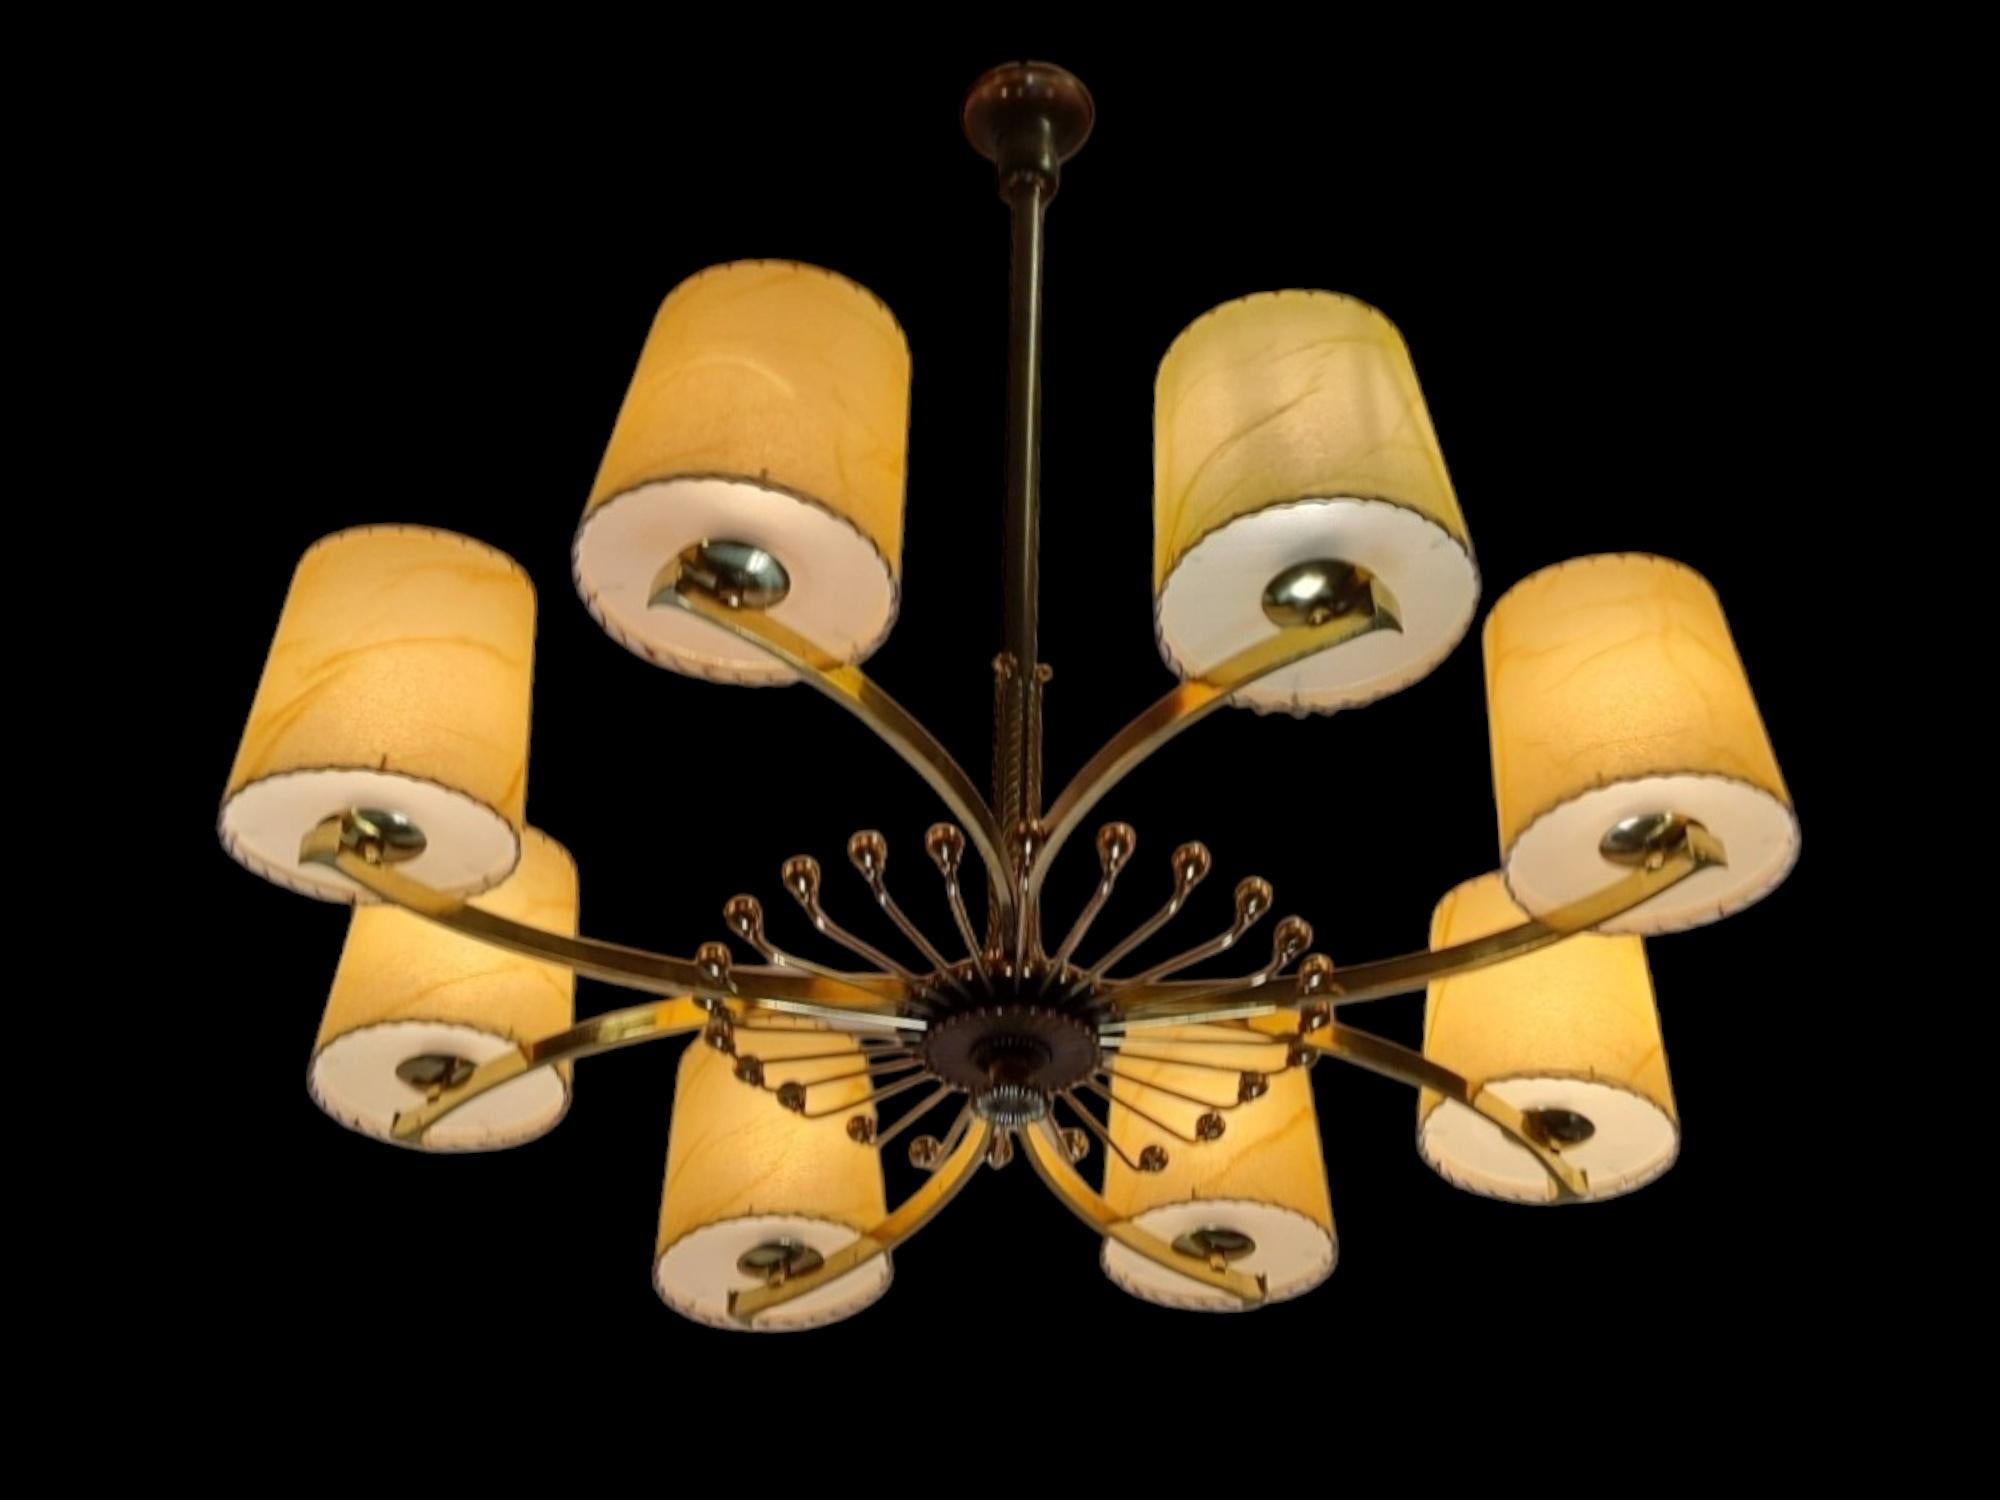 This early Tynell ceiling lamp is quite an exquisite example of how luxurious and elegant Taito lamps were, most likely from the 1930s before Tynell became a household name through his more modernistic designs.

The high quality design is quite